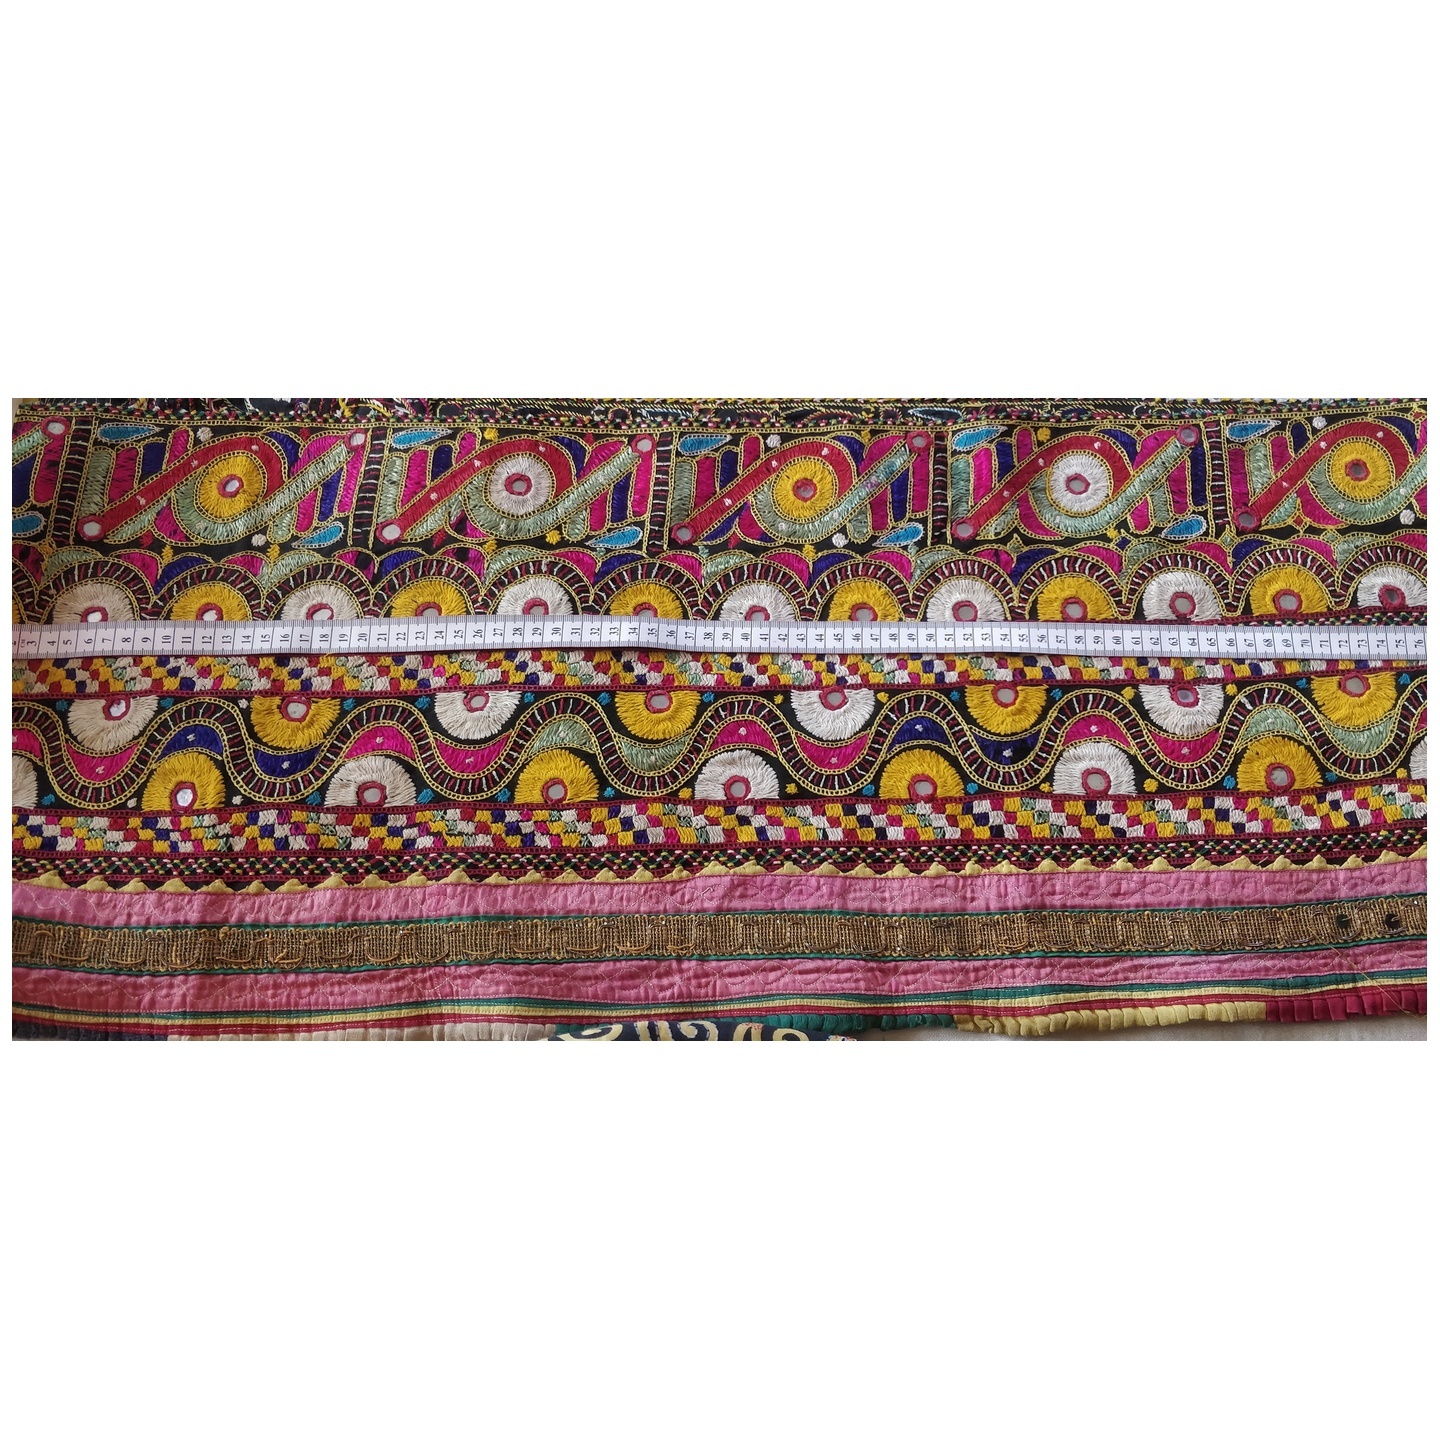 DKW01 - Kutch work hand embroidered Fabric